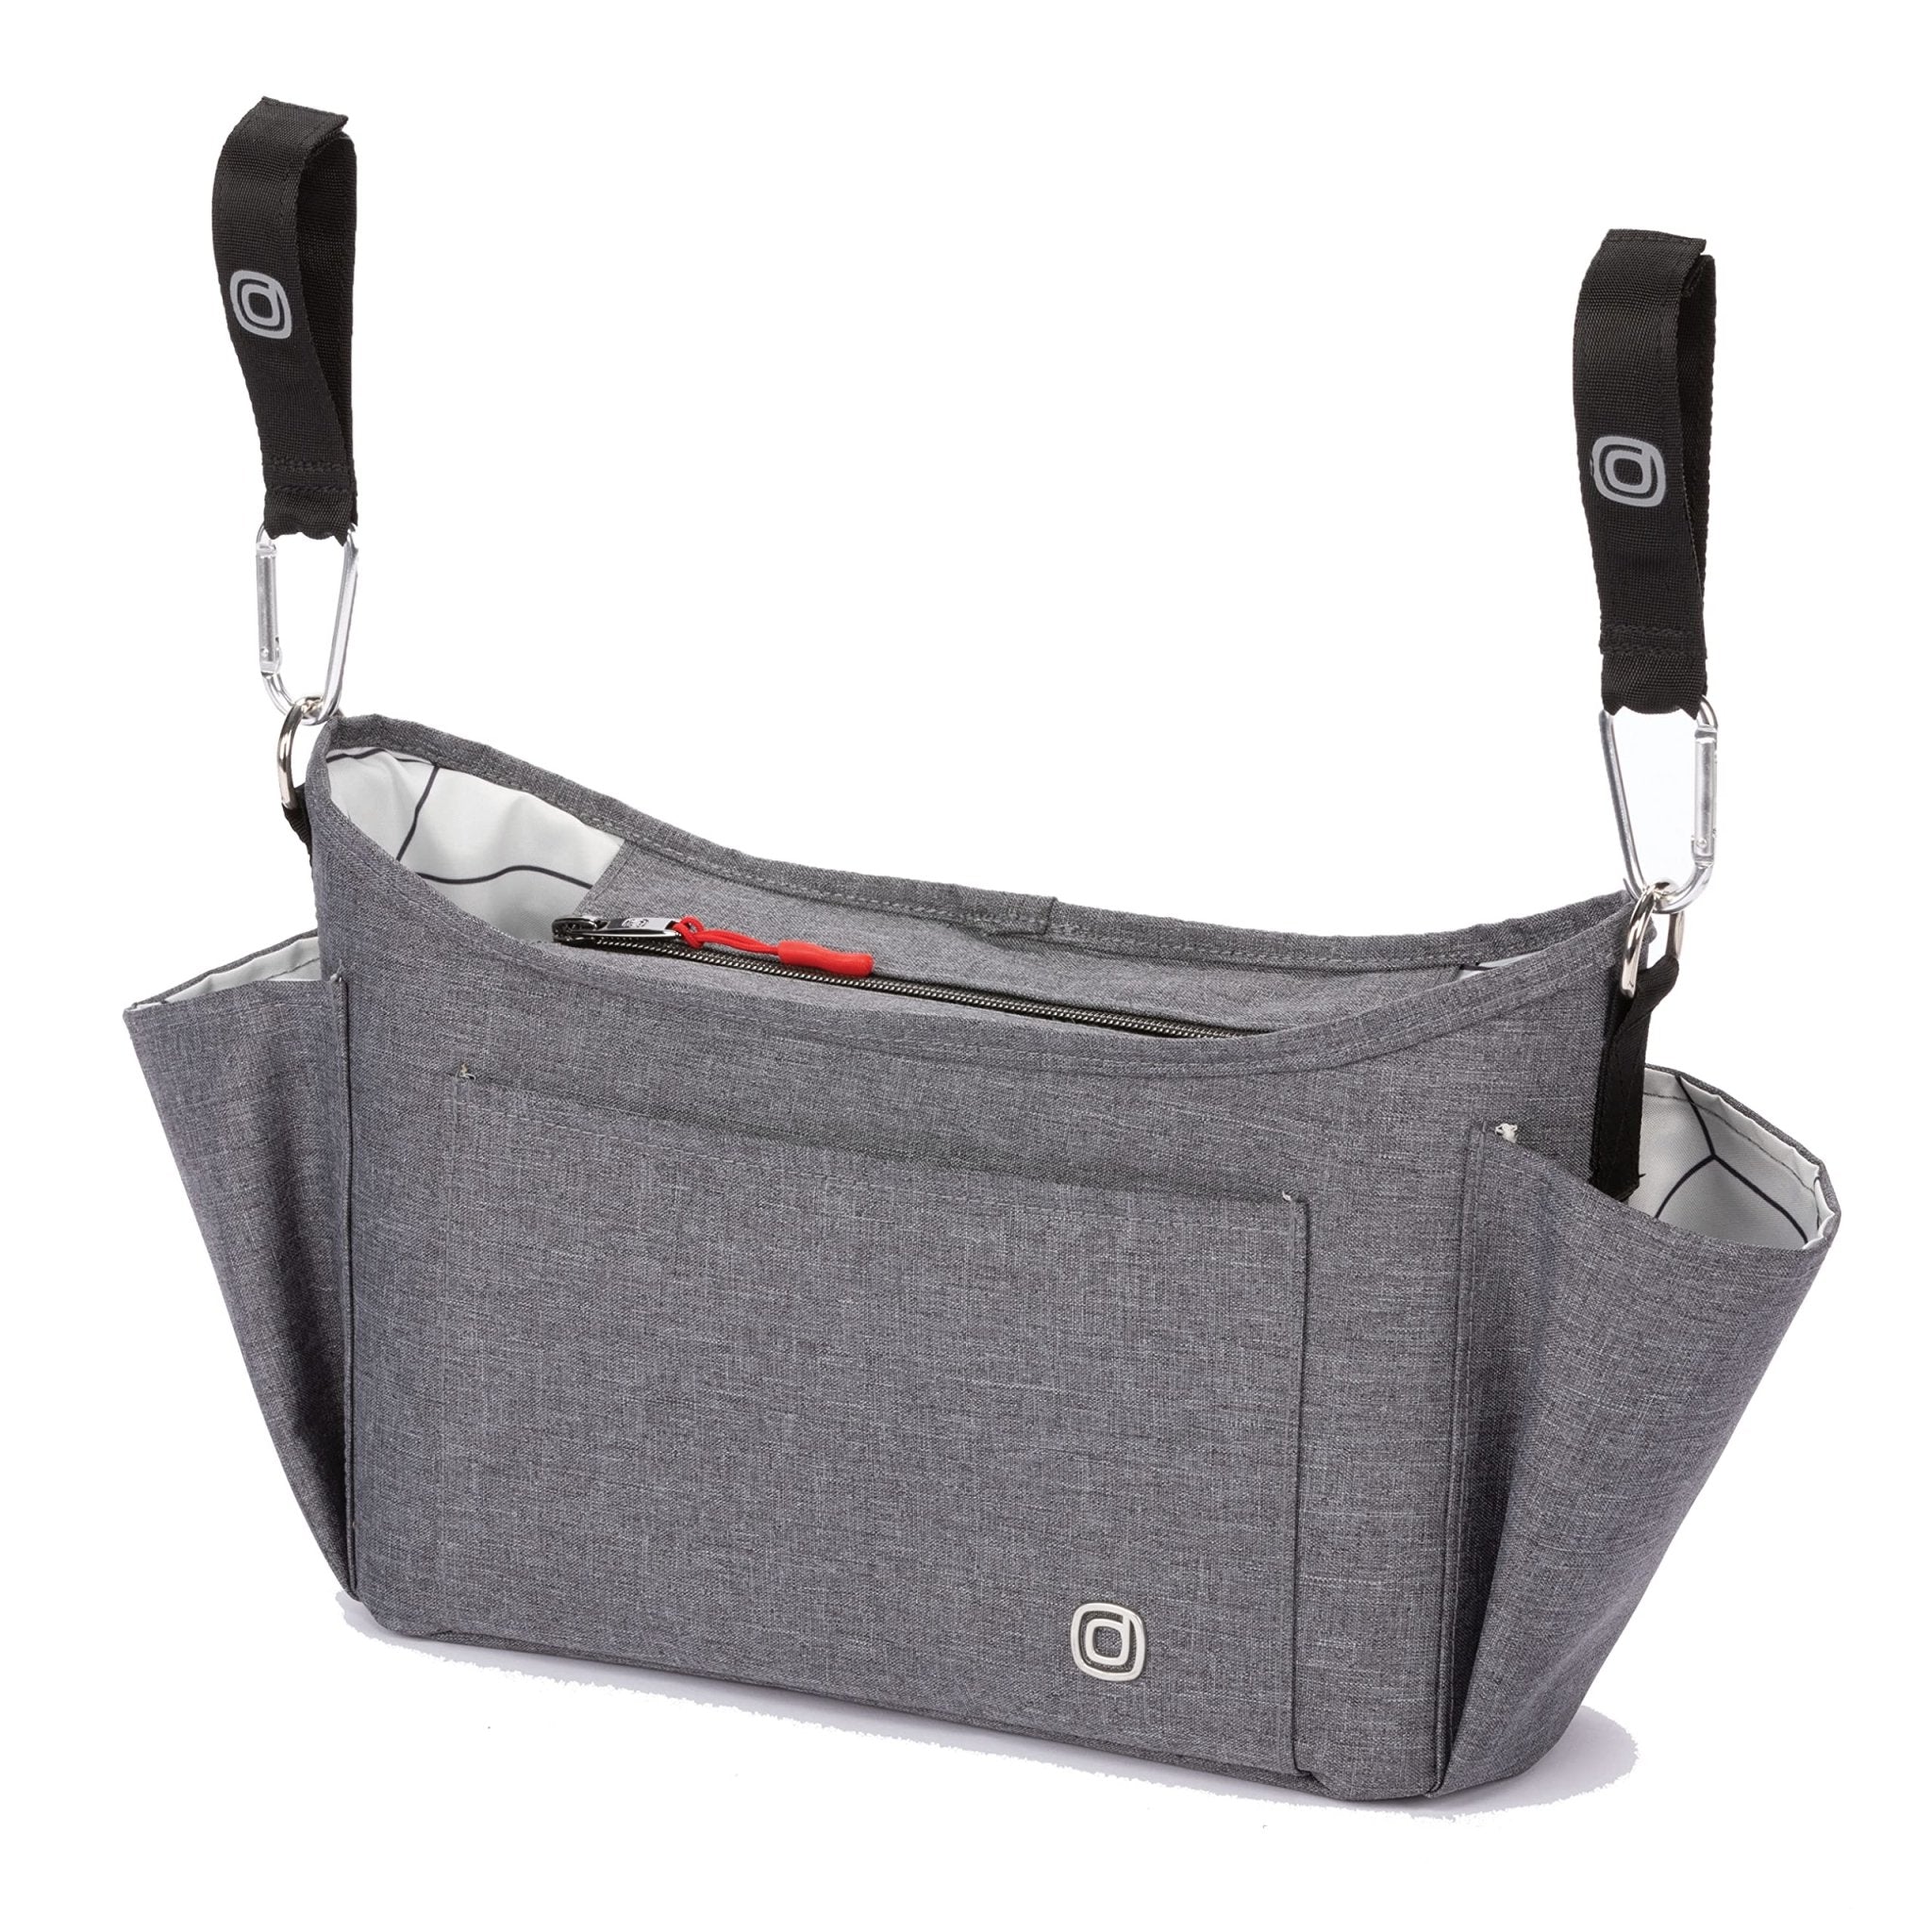 Diono Buggy Buddy 8-in-1 Stroller Organizer, X-Large, Gray - ANB Baby -677726403981$20 - $50